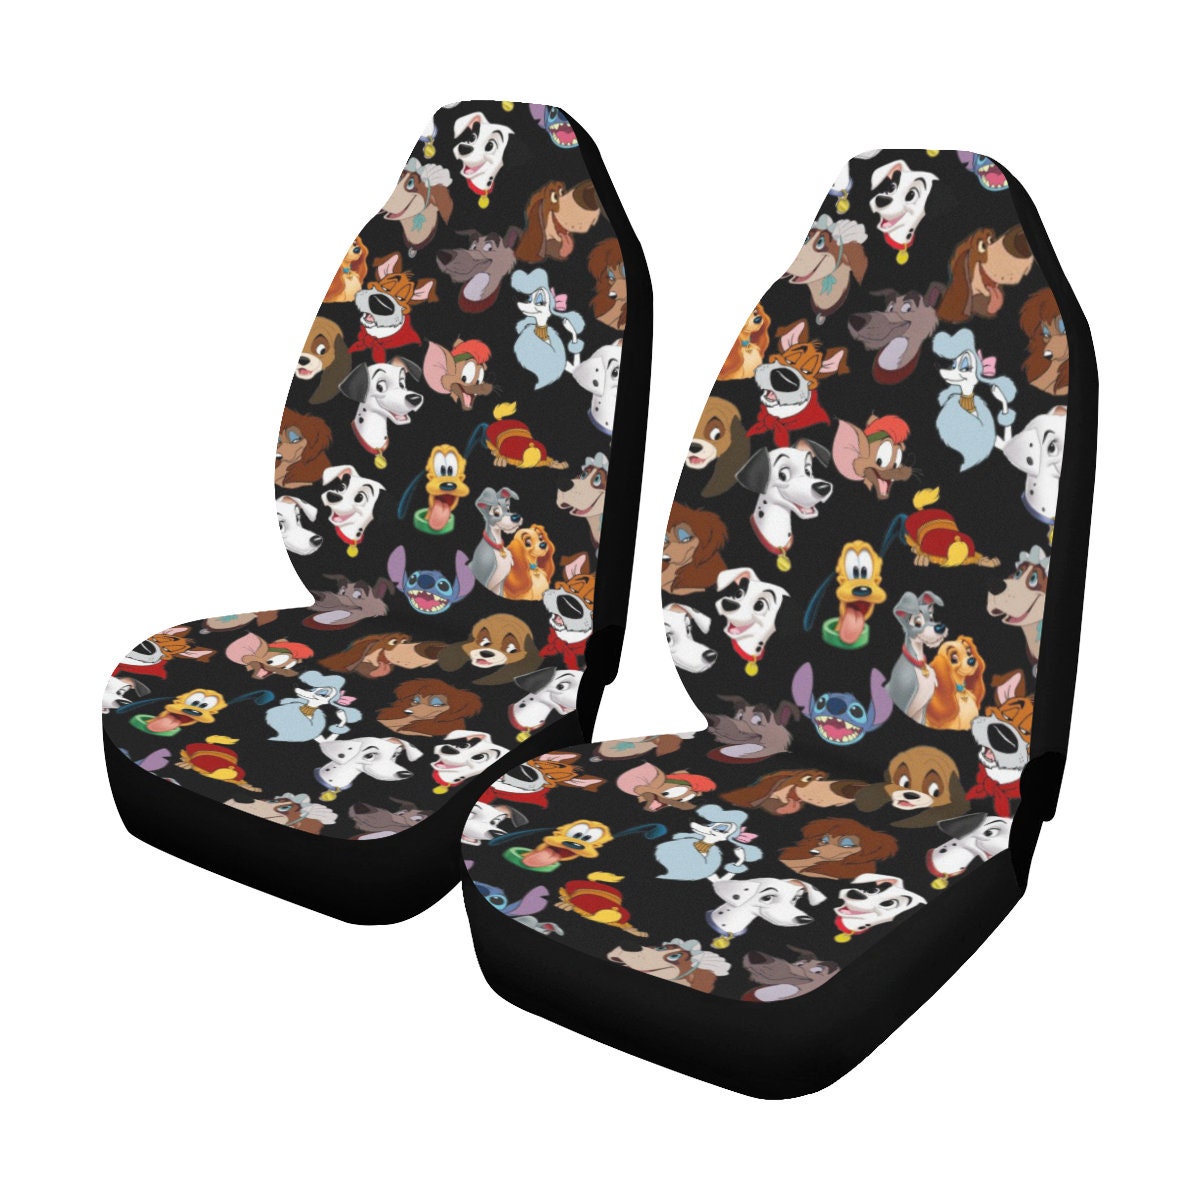 Disney Dogs Car Seat Covers | Disney Car Seat Covers